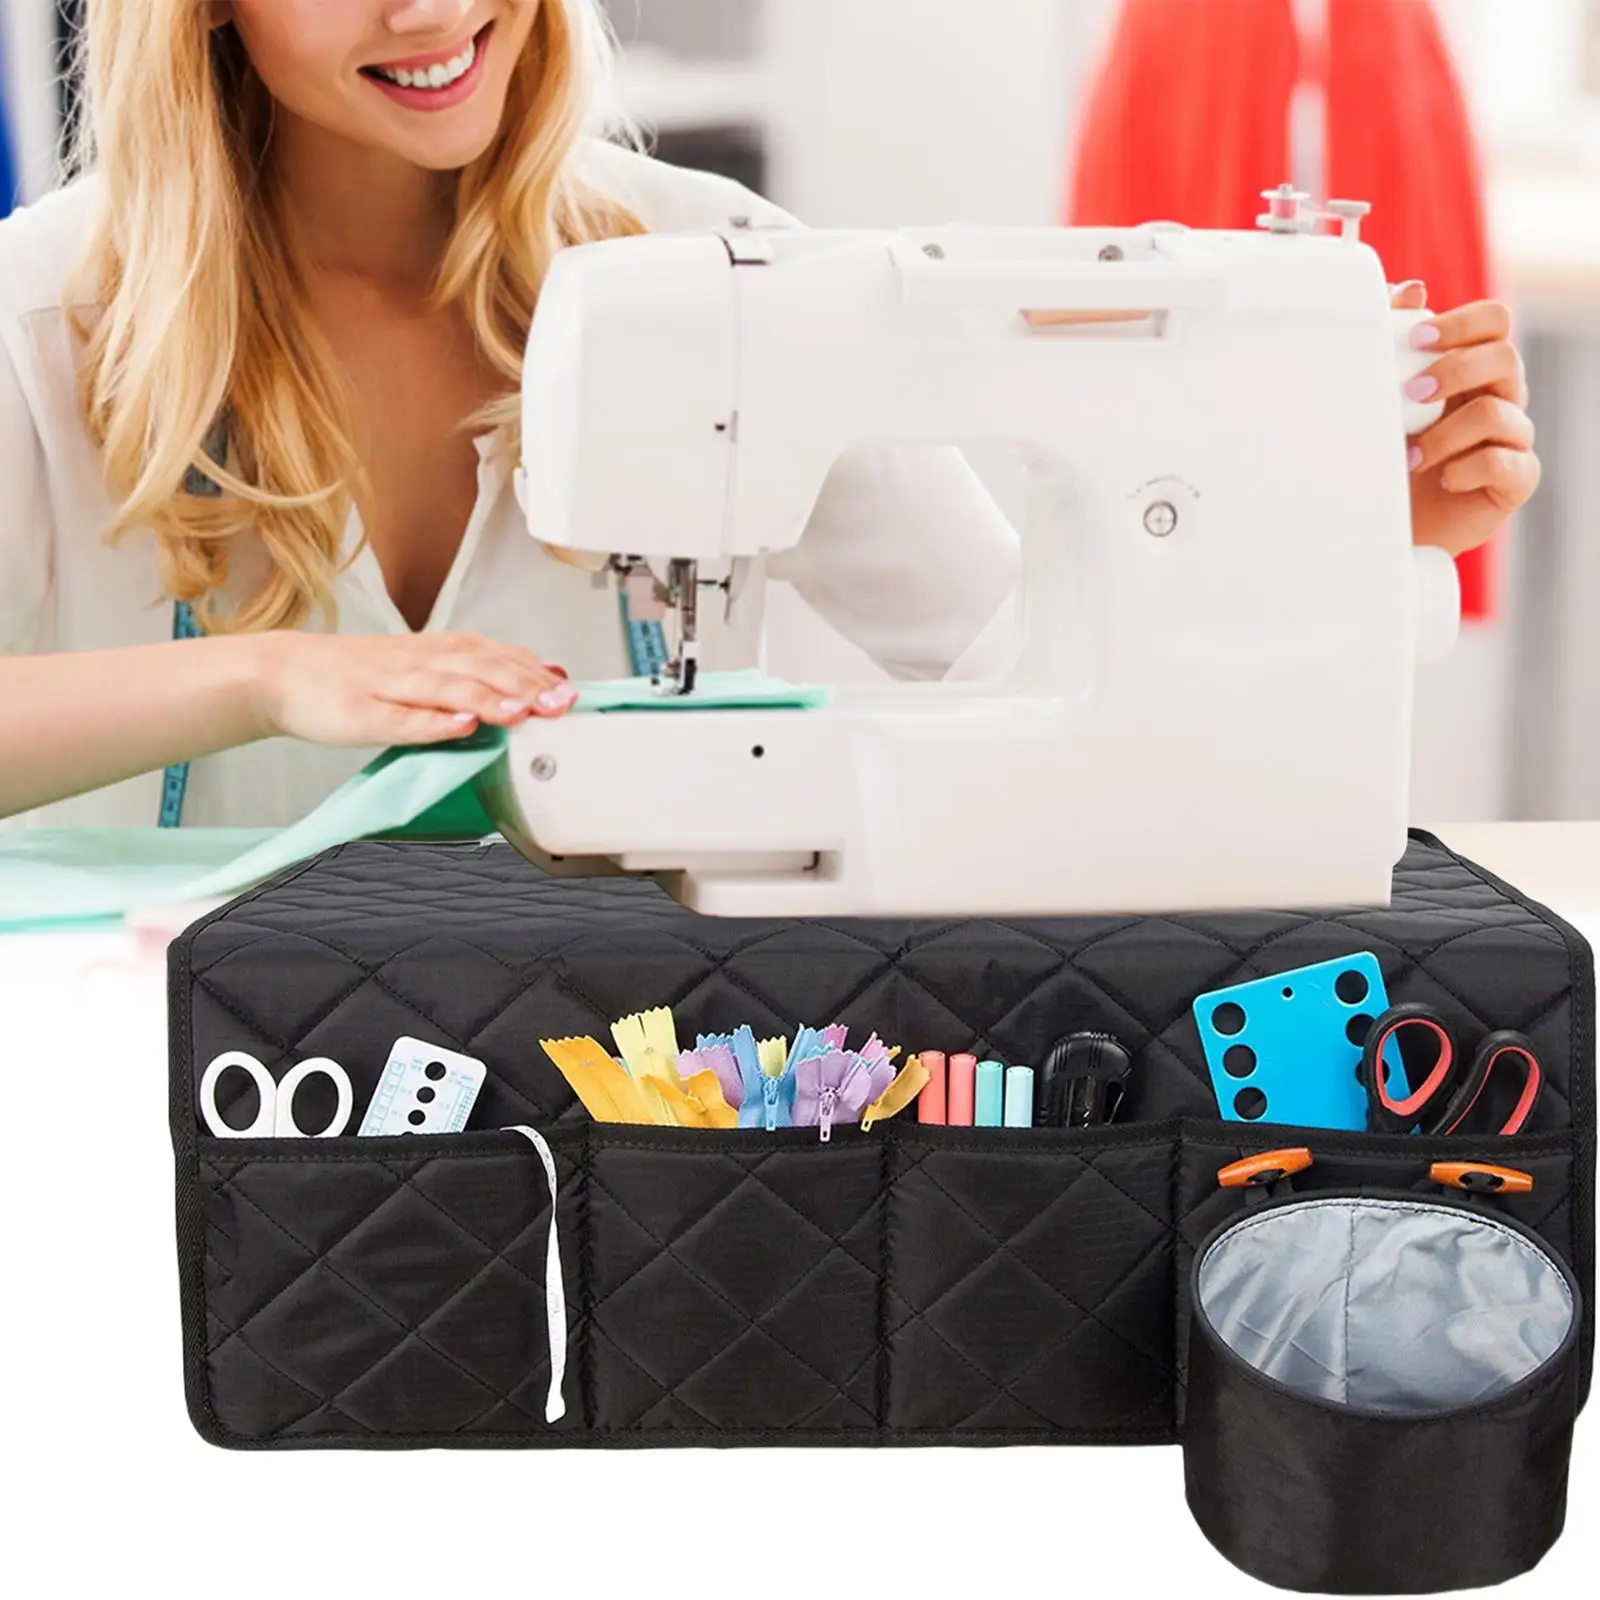 Sewing Machine Mat for Table with Pockets, Water-Resistant Sewing Machine Pad Organizer for Sewing Accessories